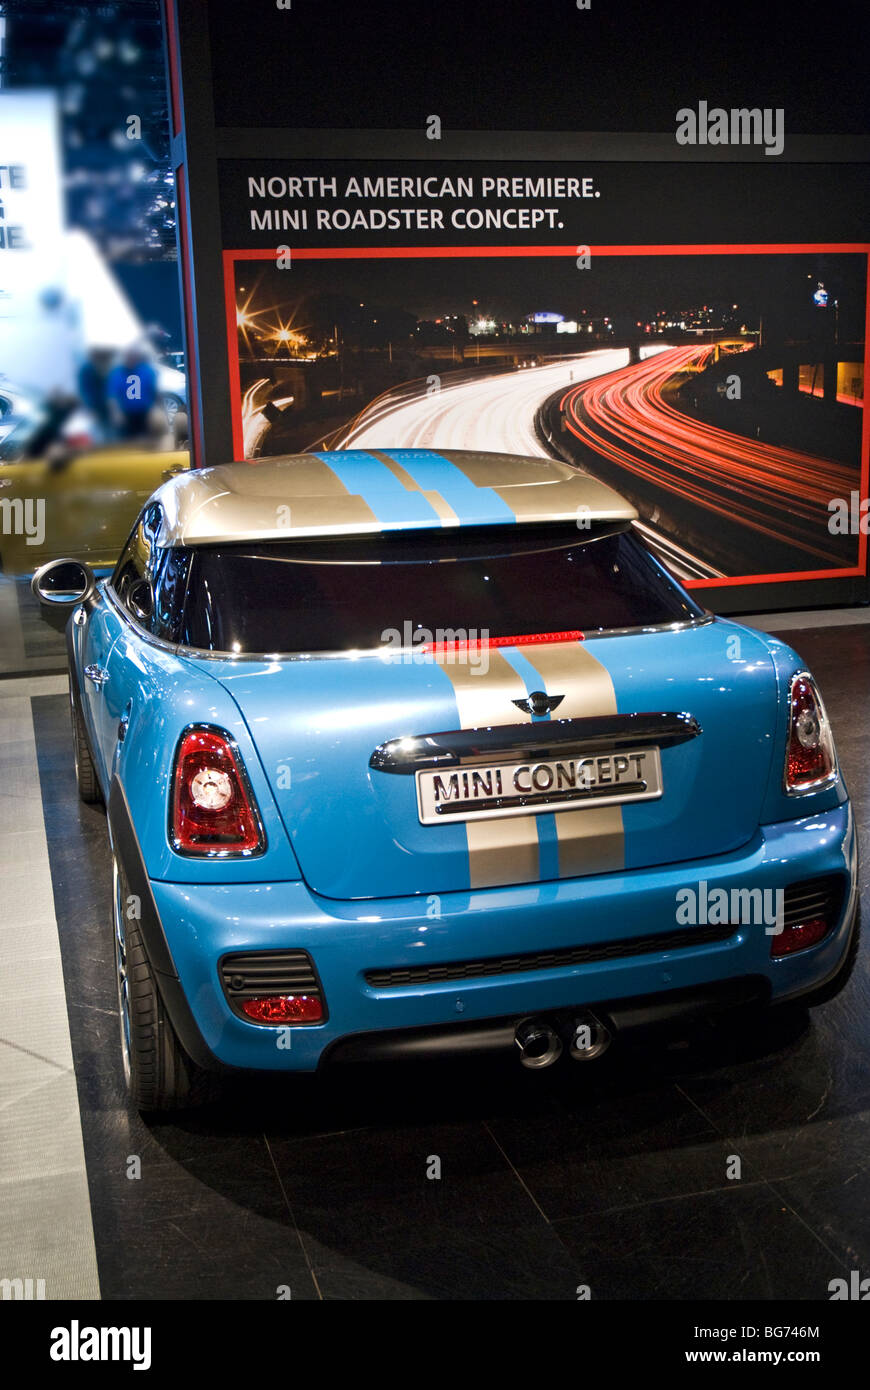 The BMW Mini Coupe Concept (N.A. Debut) at the 2009 LA Auto Show in the Los Angeles Convention Center, Los Angeles, California. Stock Photo